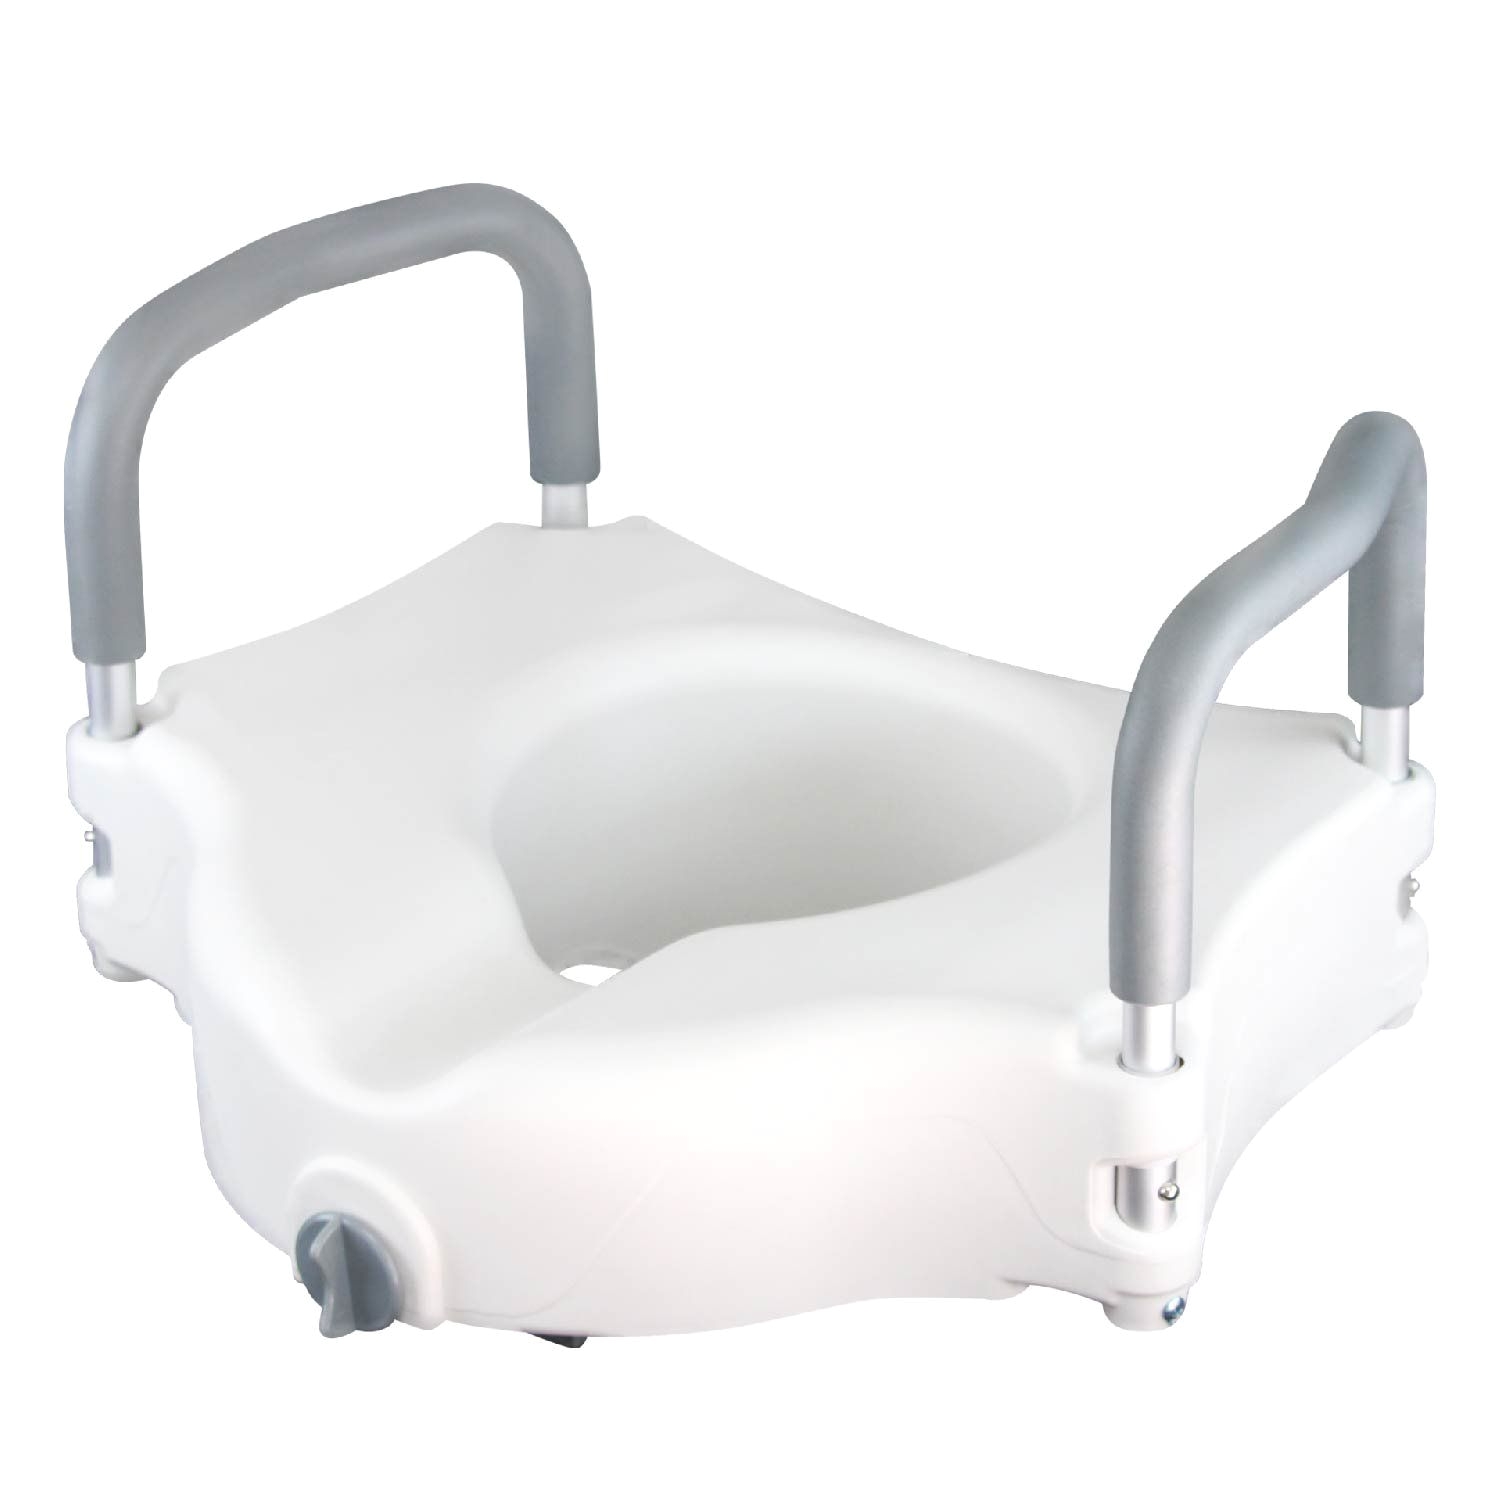 raised toilet seat by vive portable elevated riser with padded handles toilet seat lifter